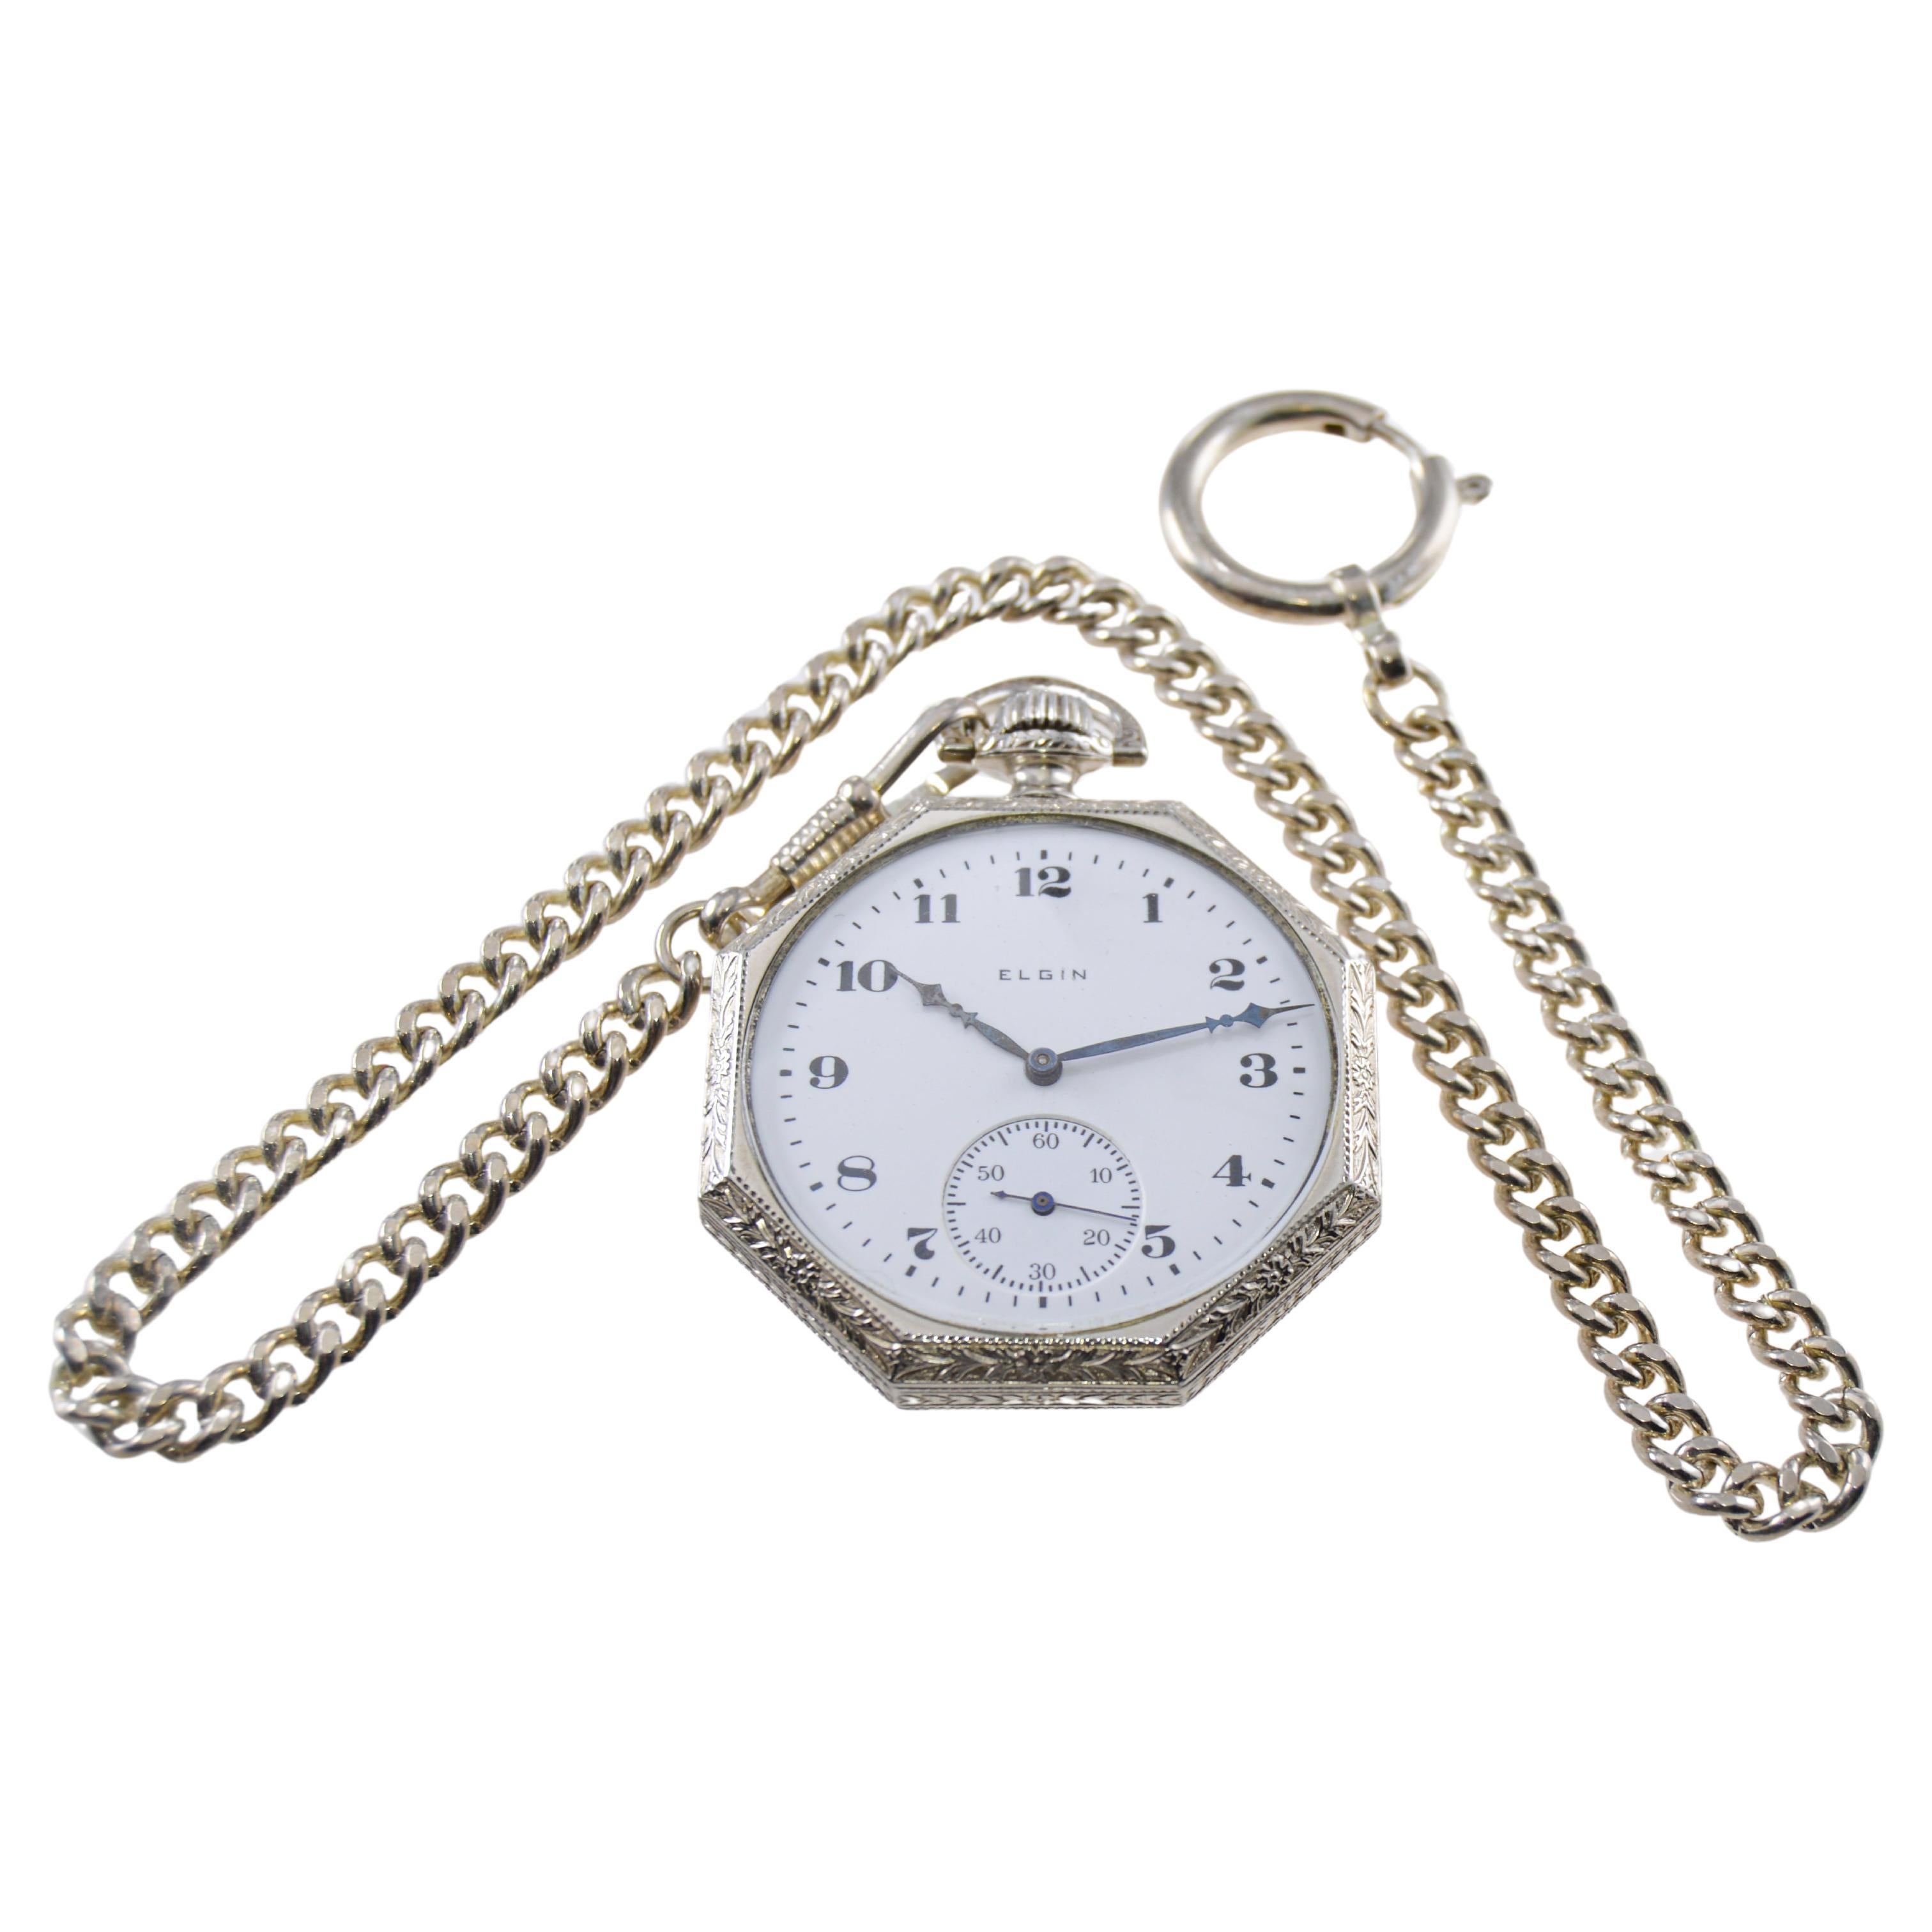 What is a pocket watch chain called?